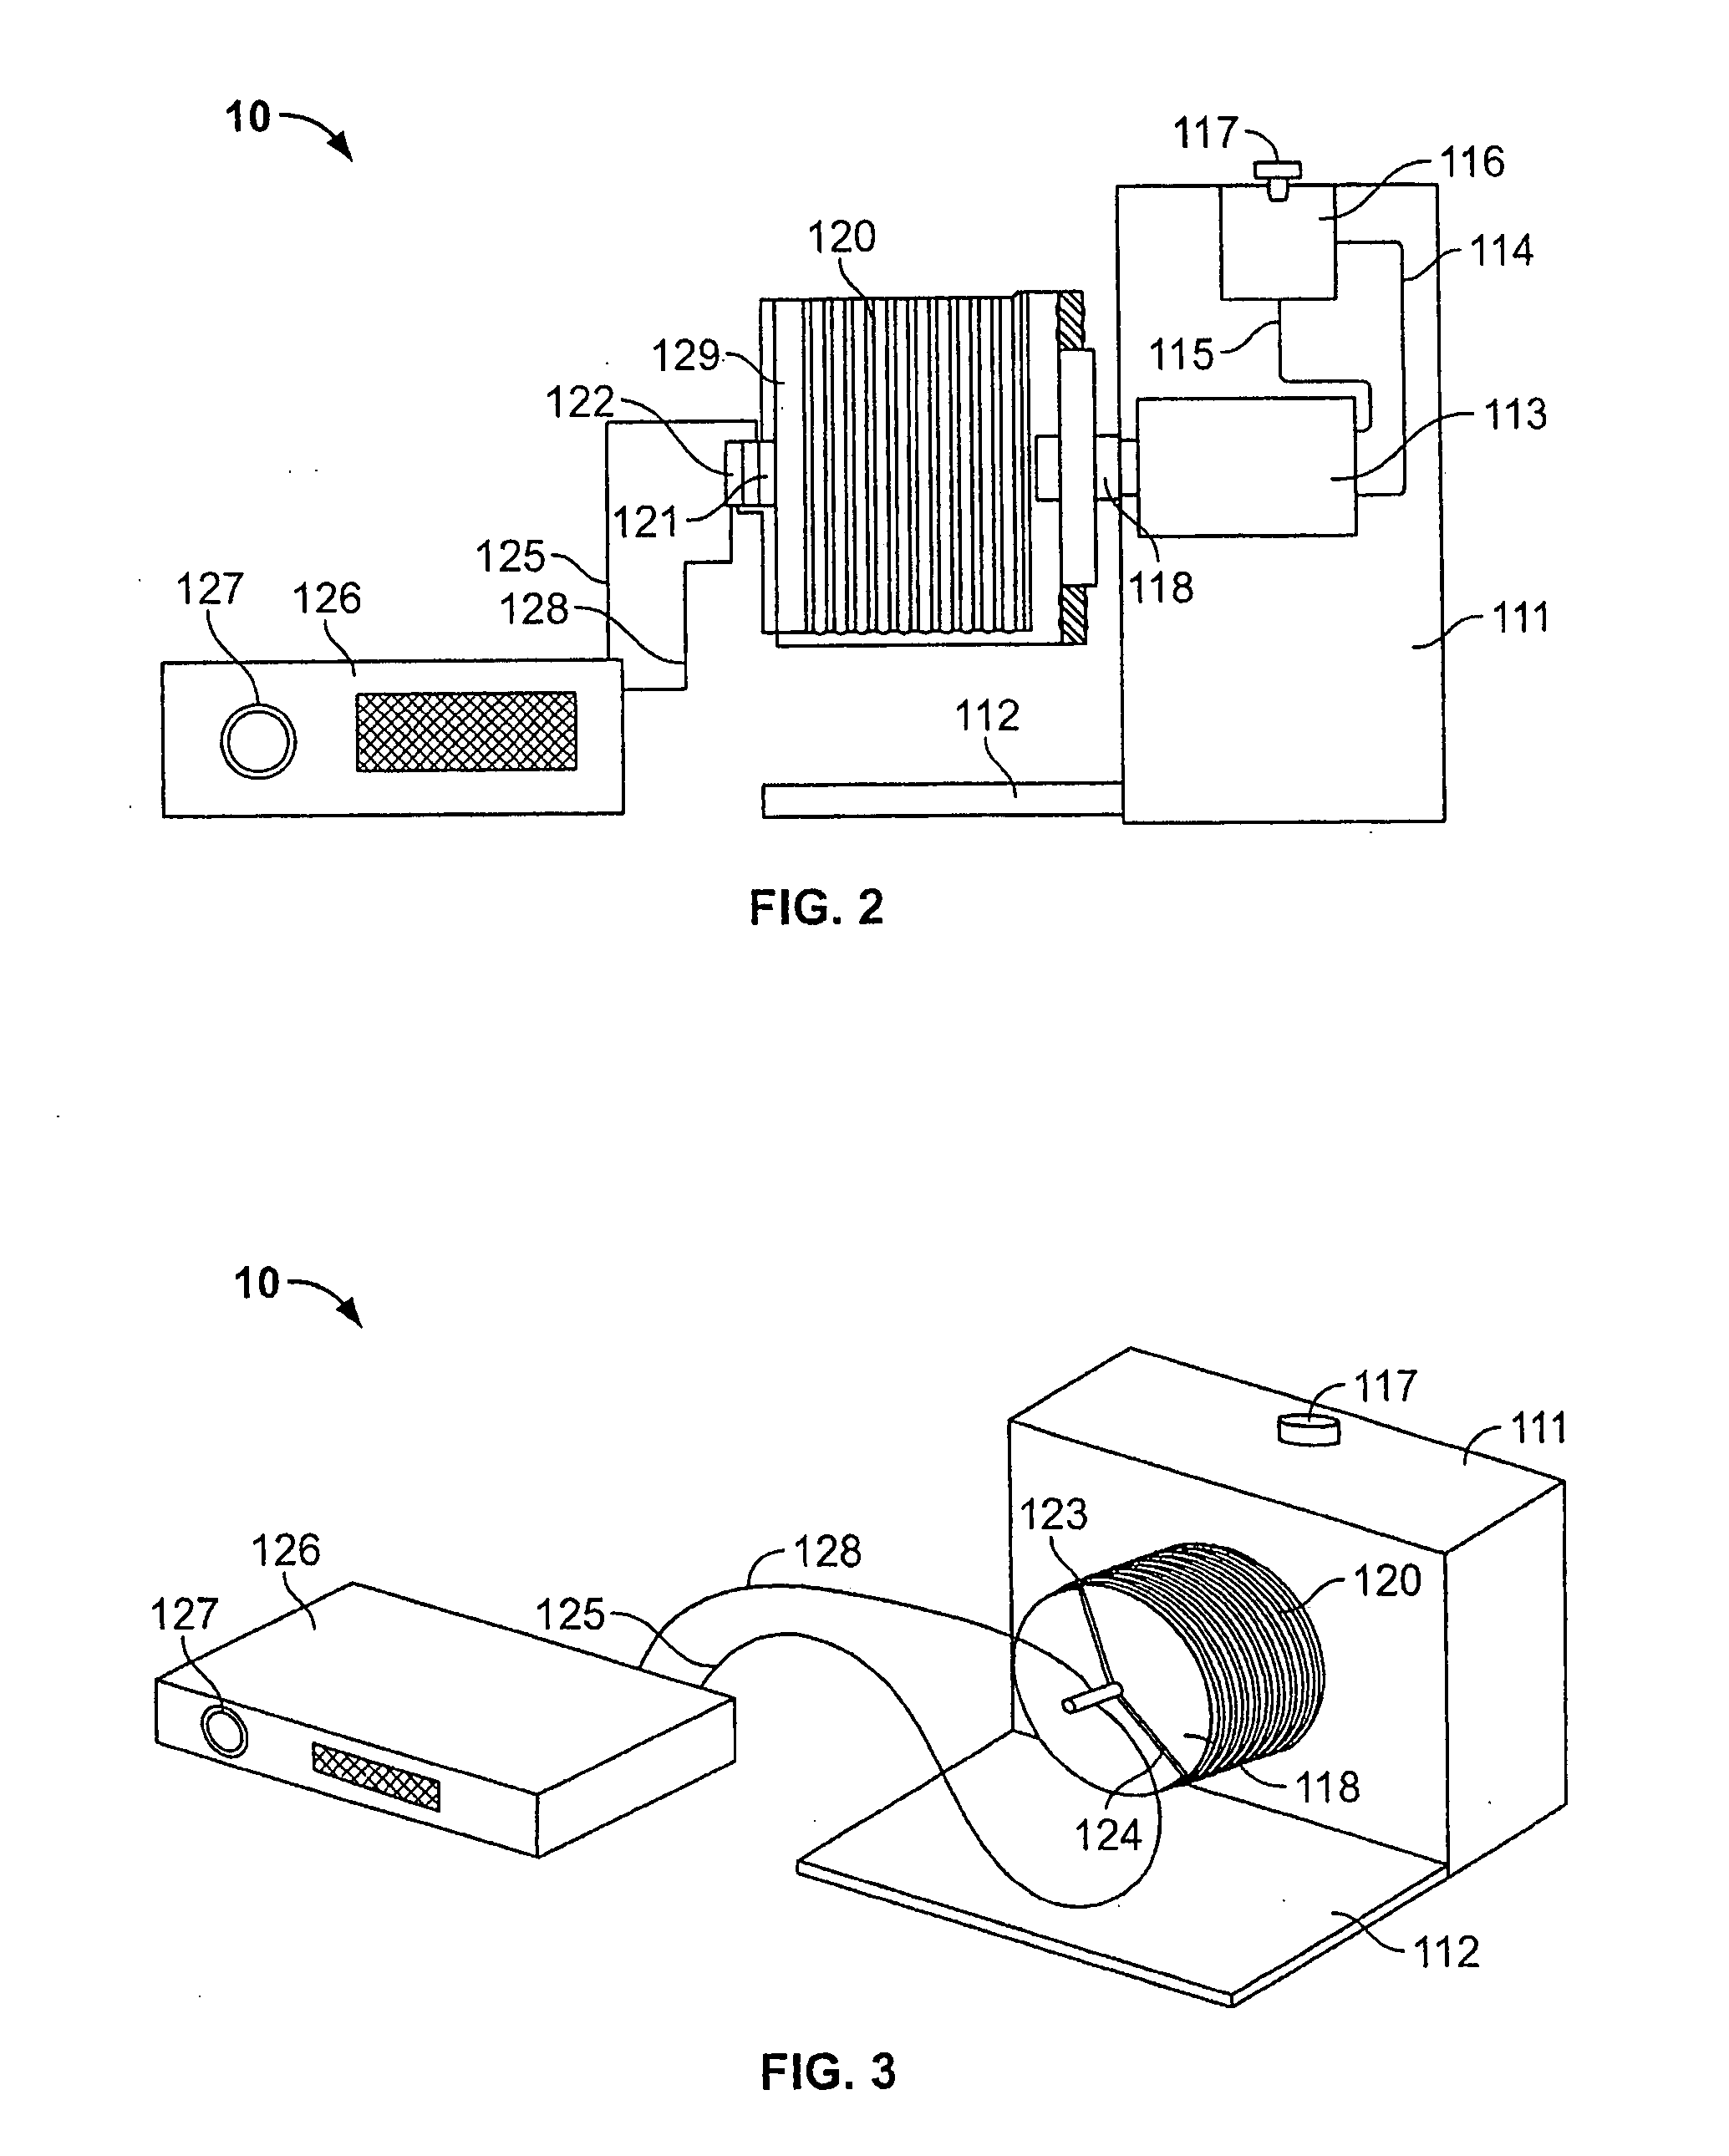 Method and composition for repairing heart tissue